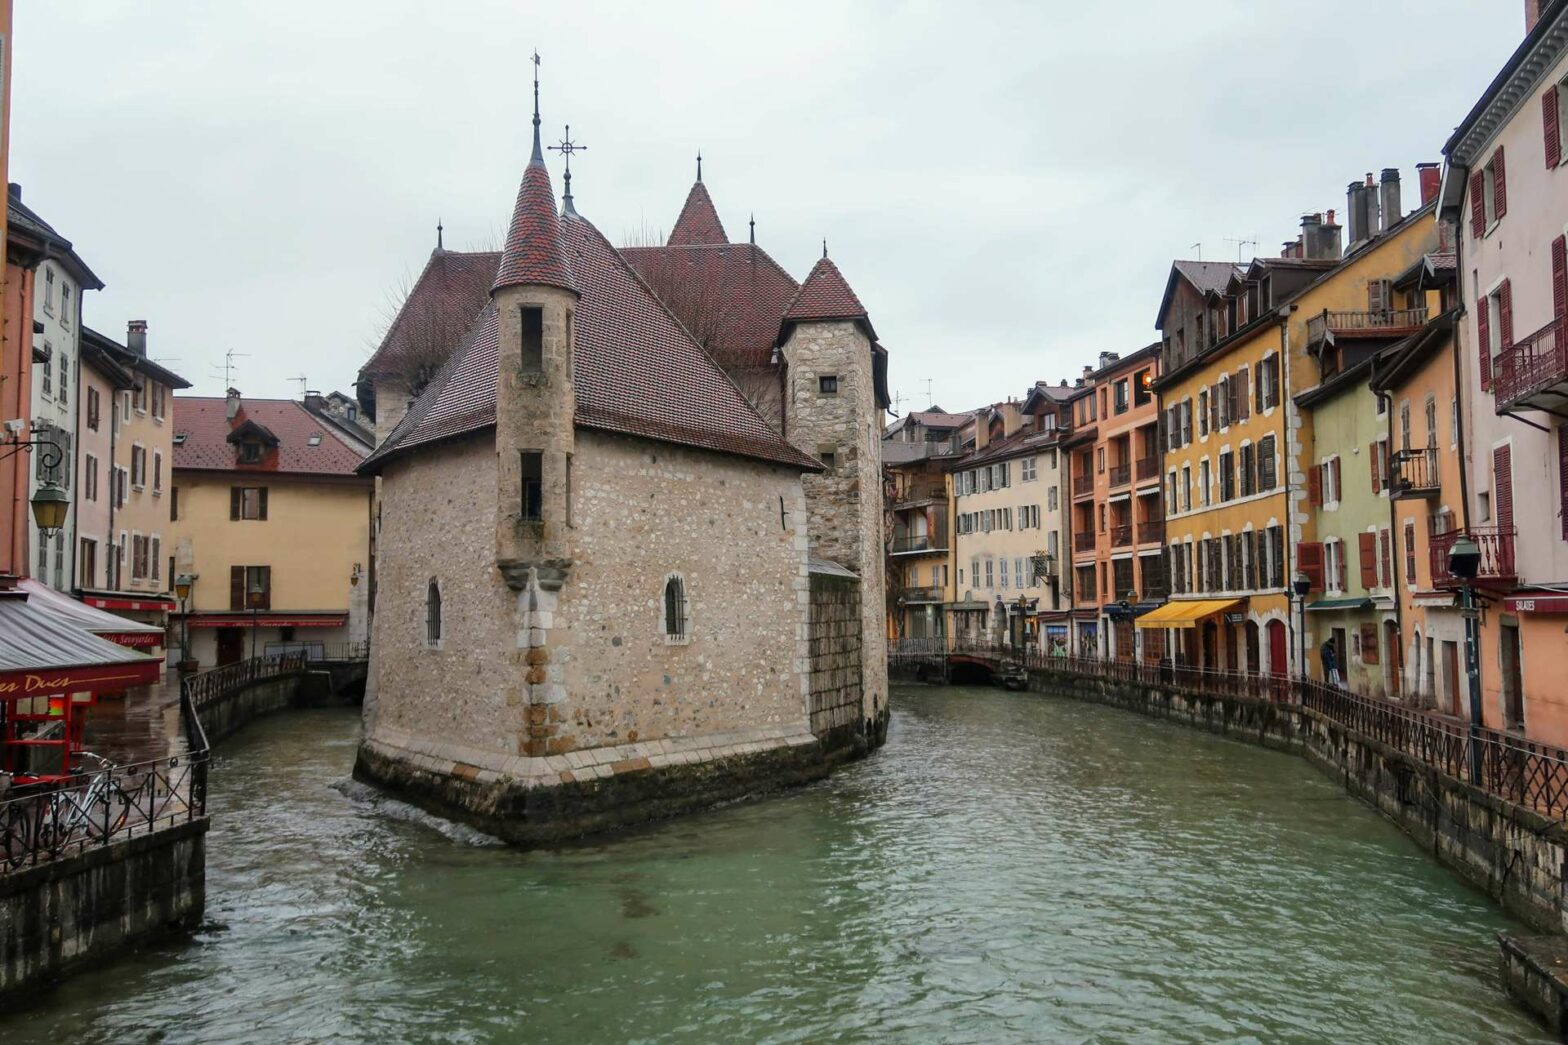 The Palais de L'Isle in Annecy, France